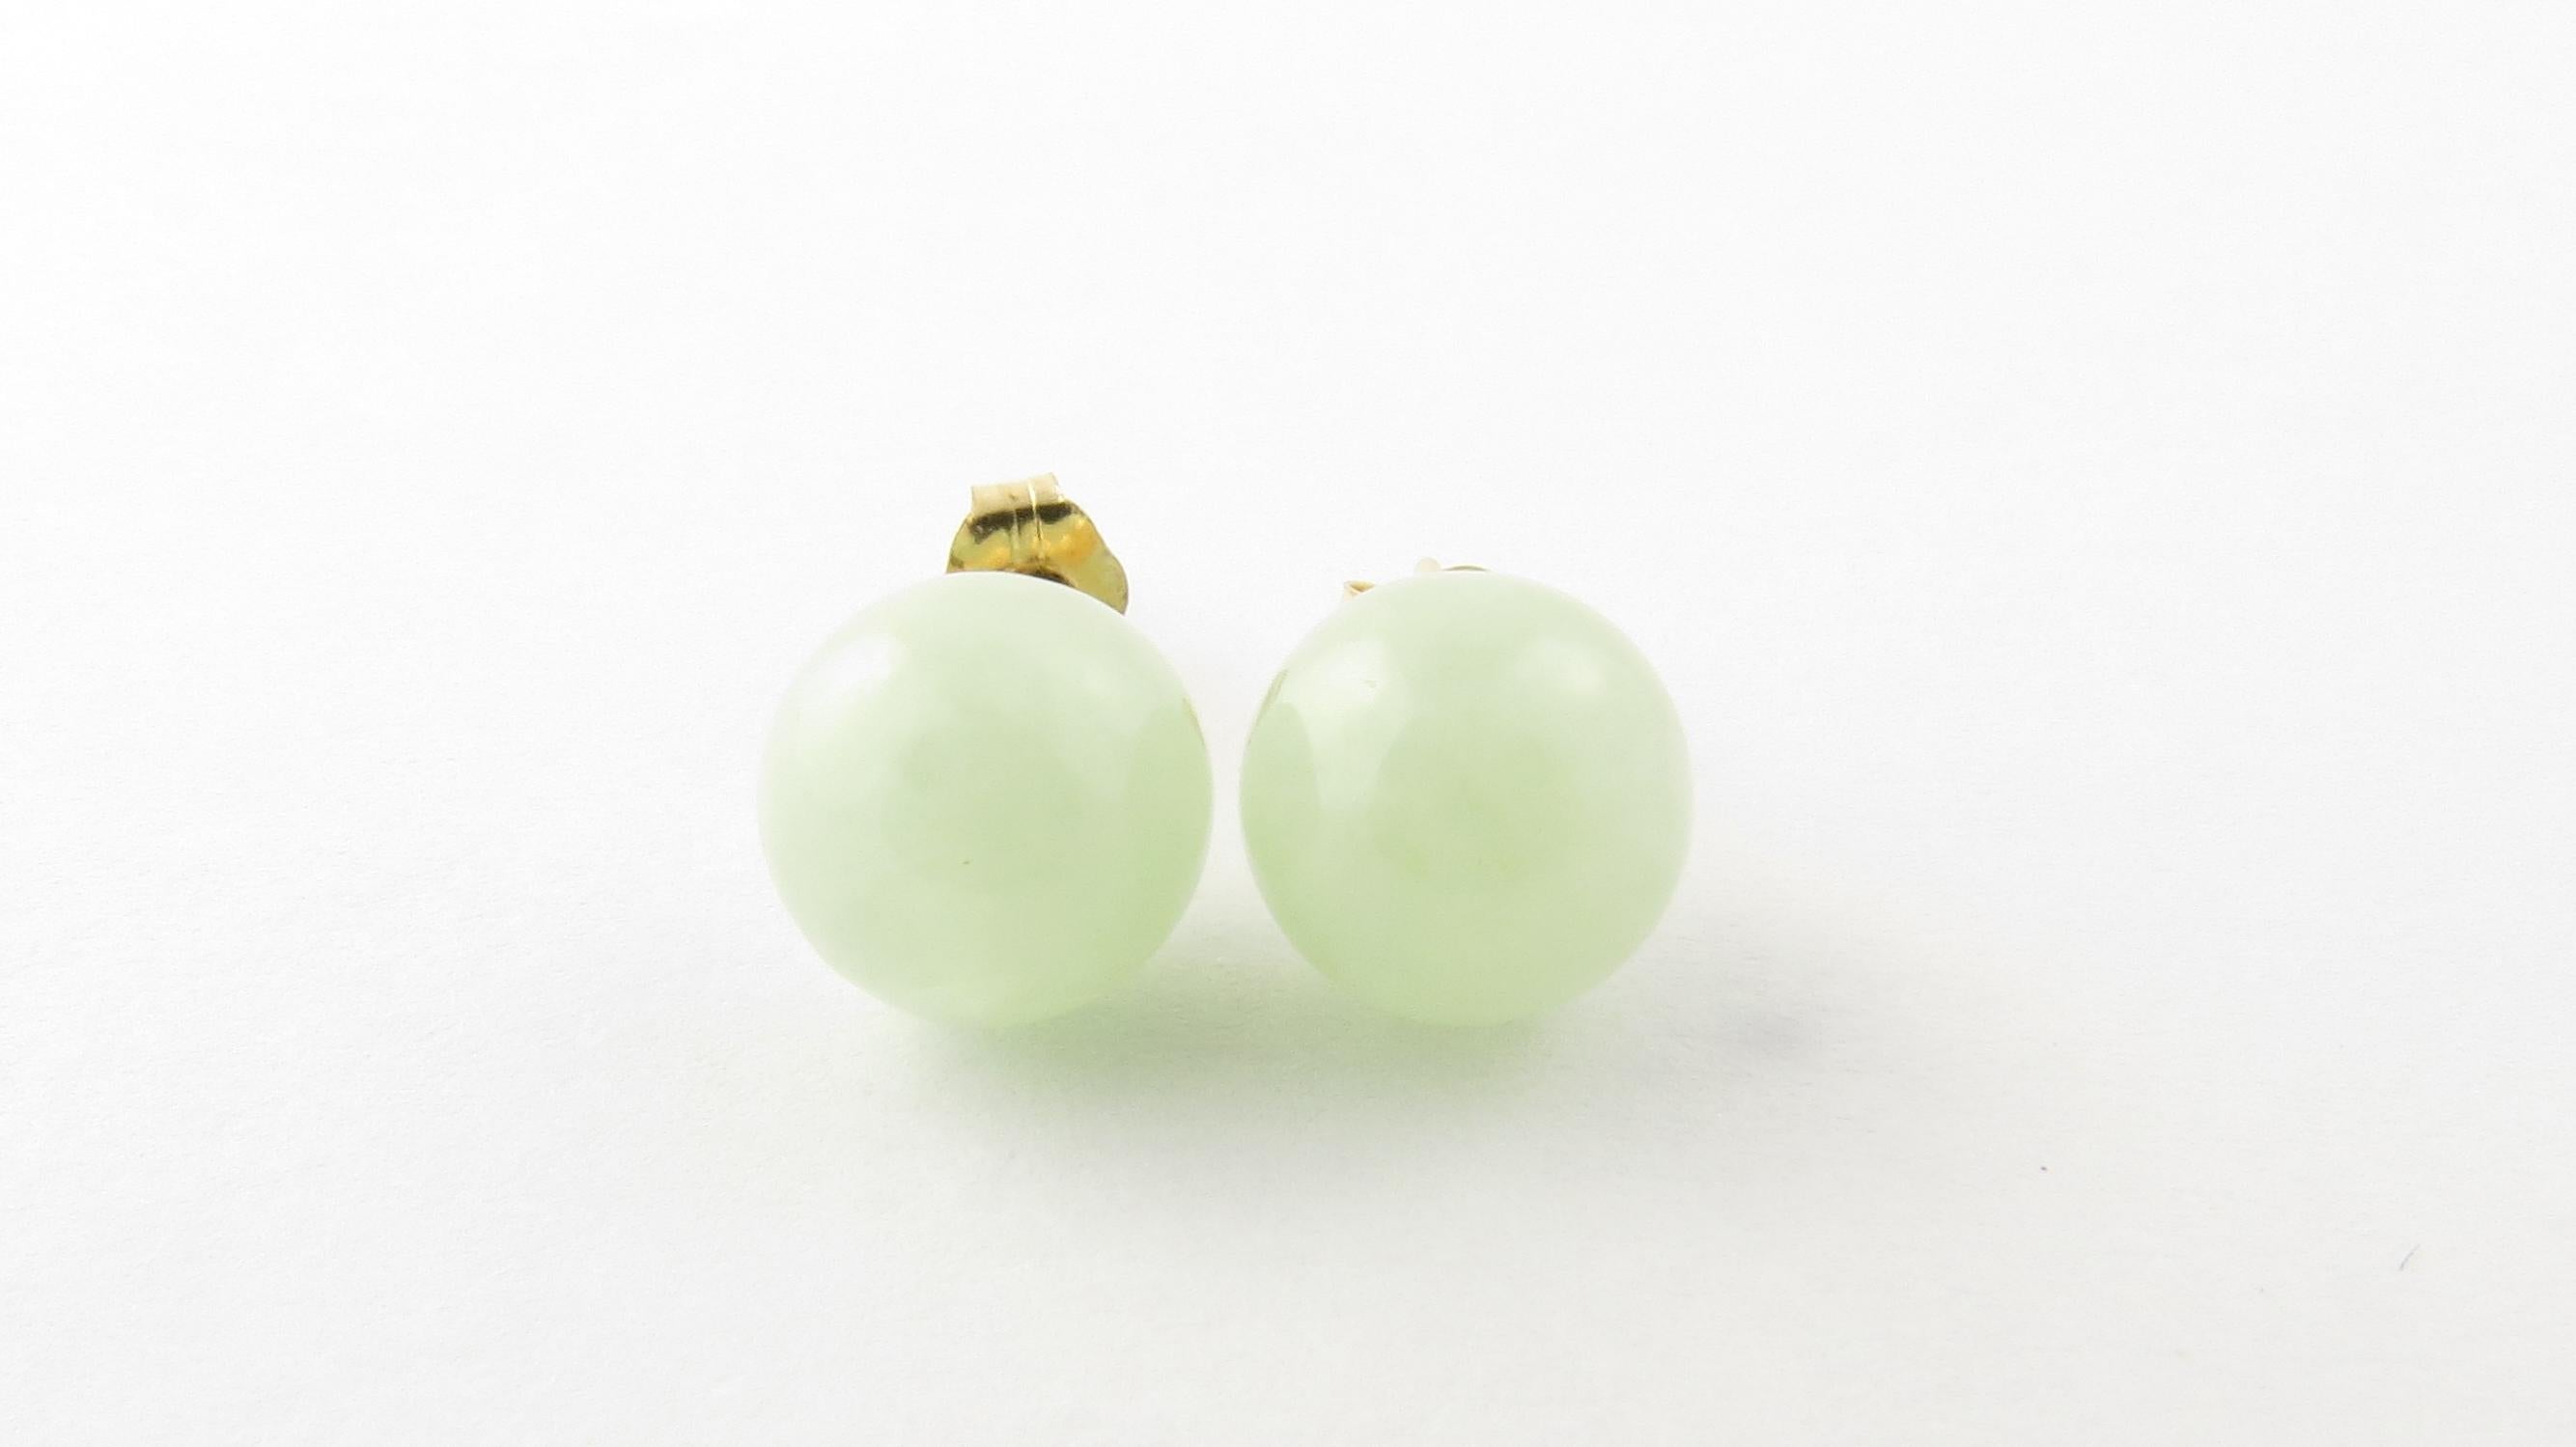 Vintage 14 Karat Yellow Gold Jade Stud Earrings

These lovely earring each feature one jade gemstone set in 14K yellow gold. Push back closures.

Size: 8 mm

Weight: 1.2 dwt. / 2.0 gr.

Stamped: 14K

Very good condition, professionally polished.